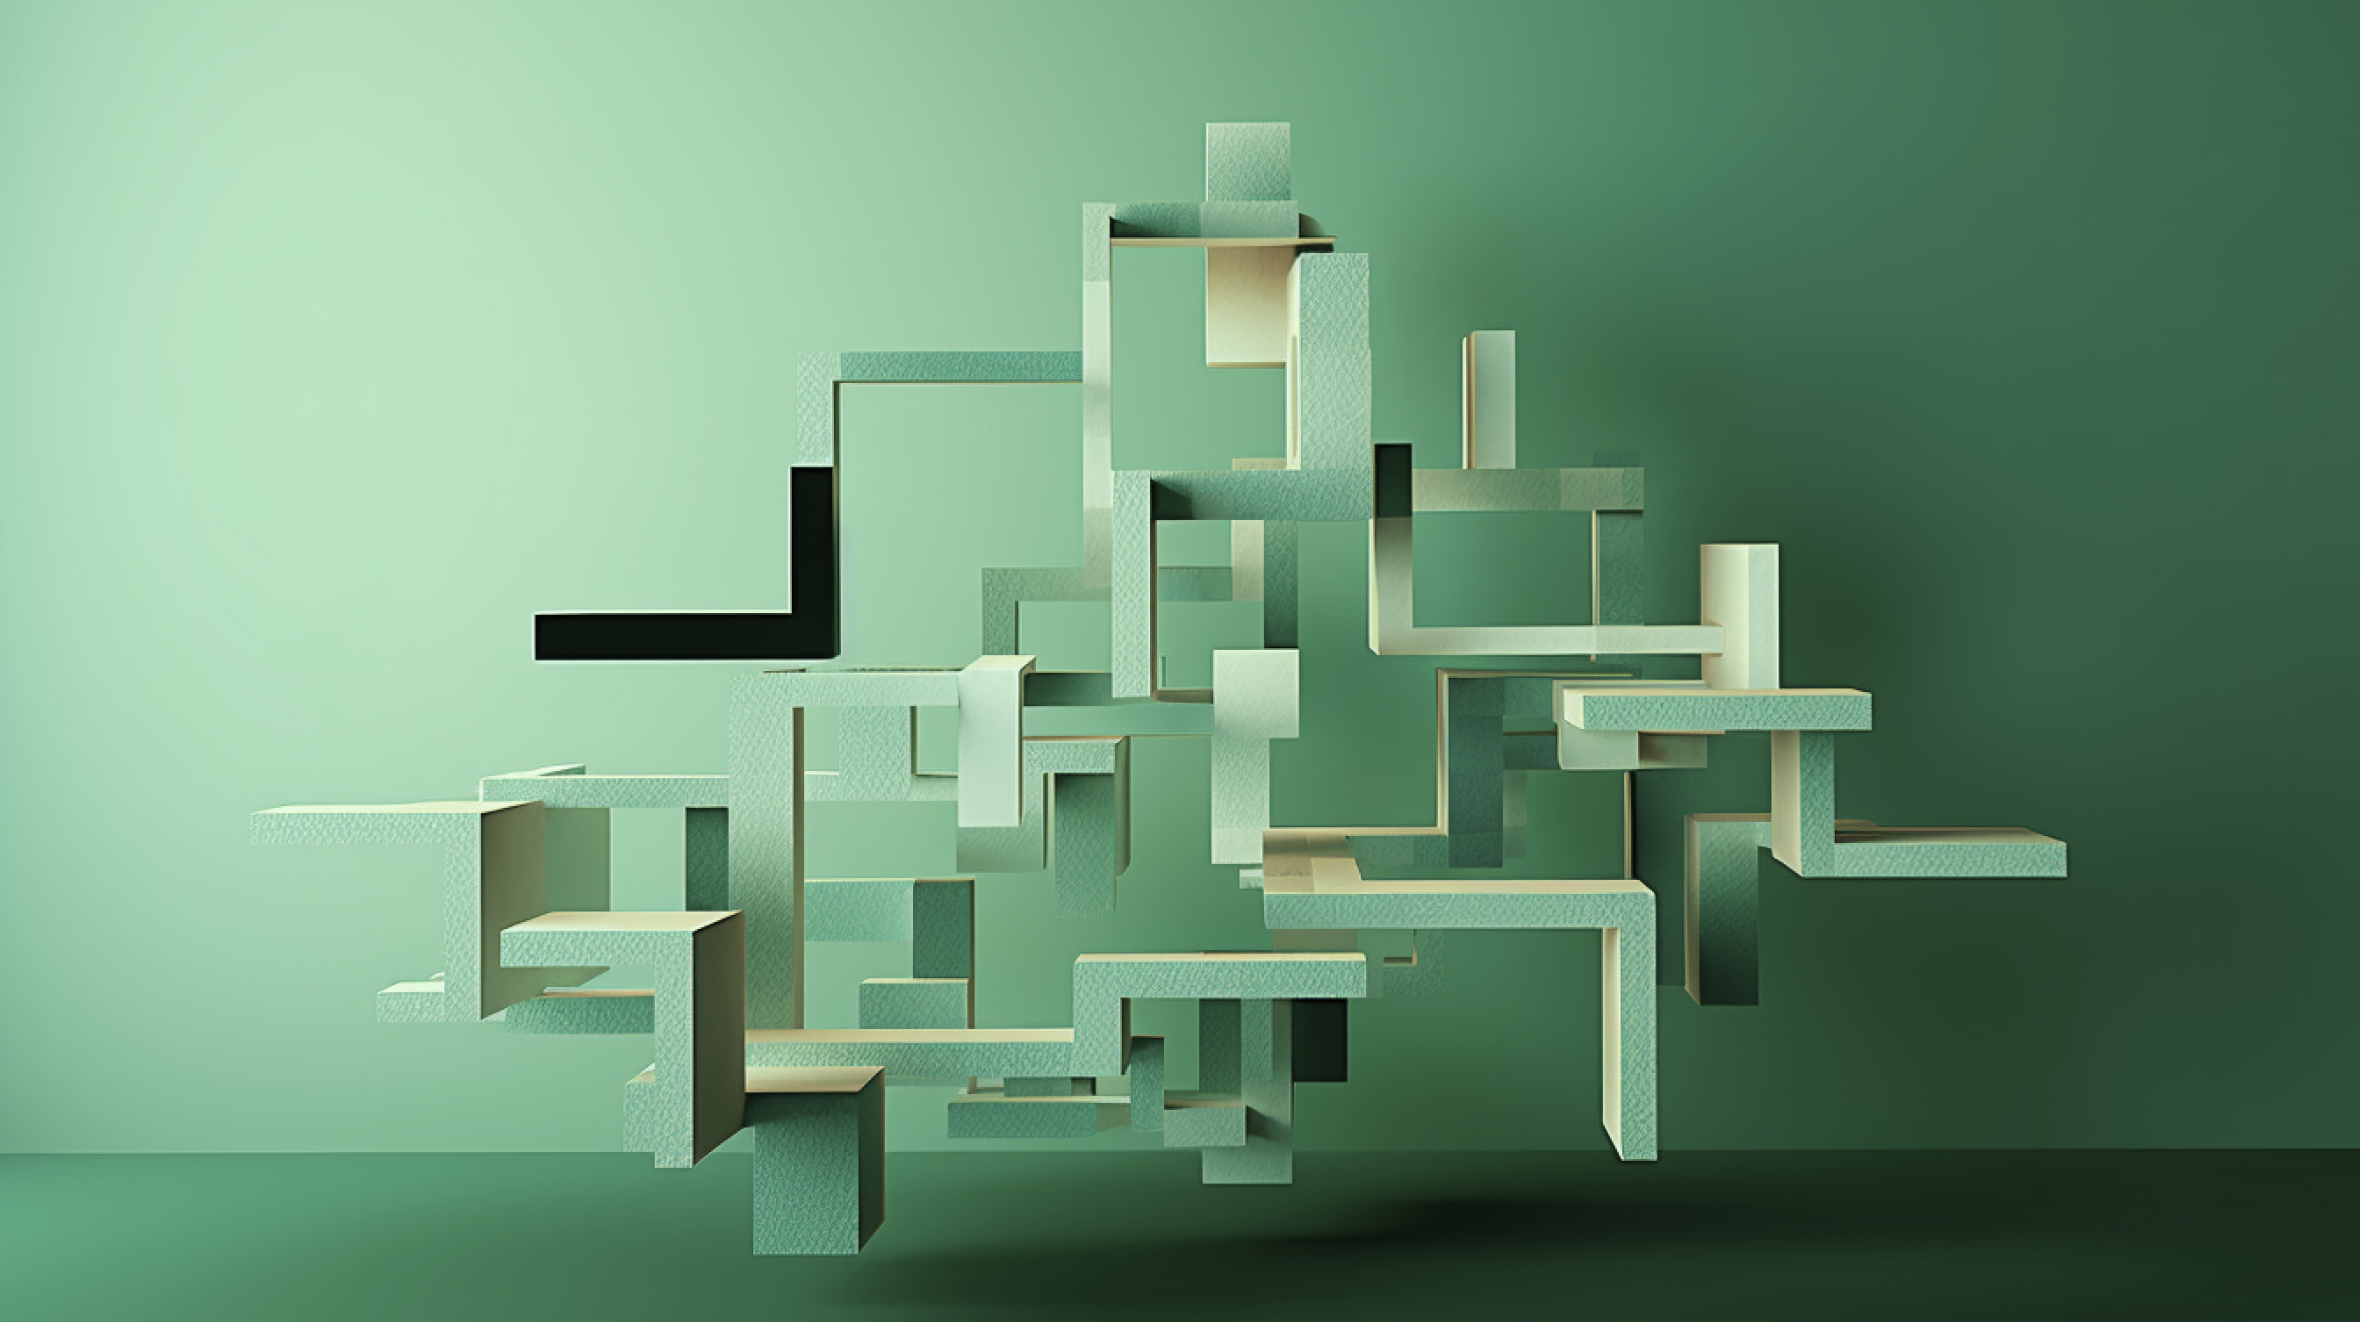 Abstract image about structured content to represent bringing order out of chaos on a light green background